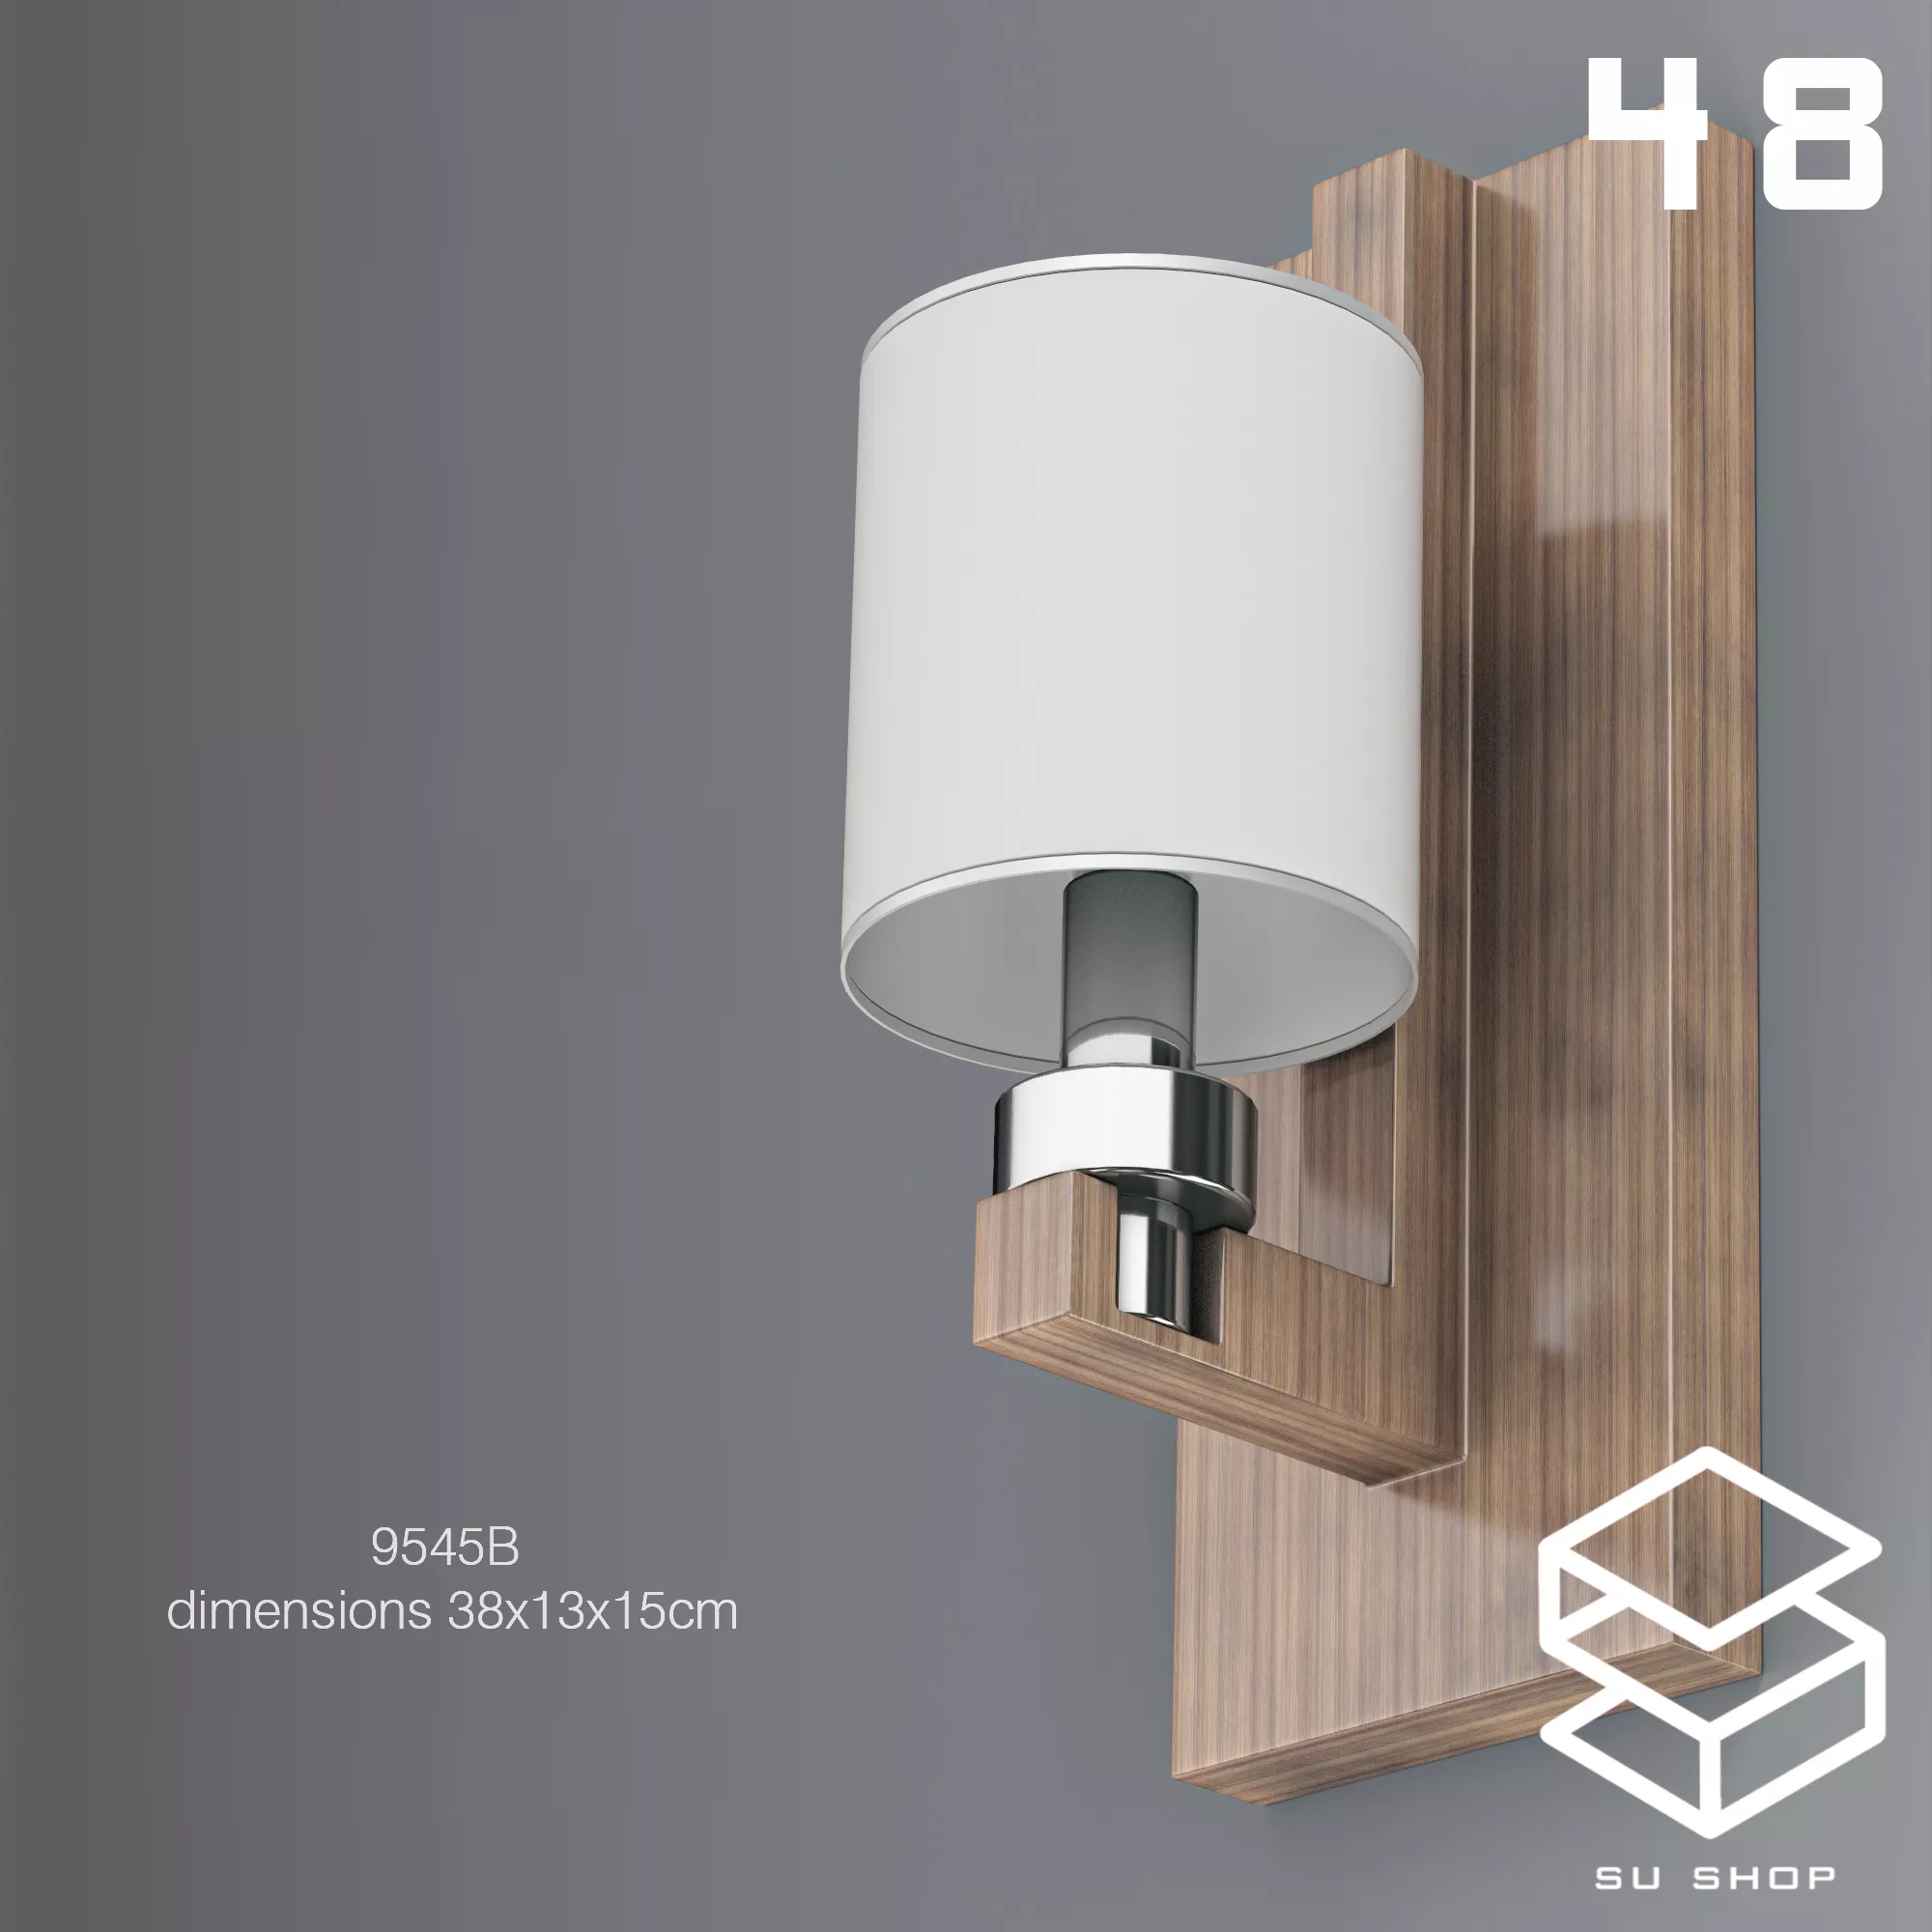 MODERN WALL LAMP - SKETCHUP 3D MODEL - VRAY OR ENSCAPE - ID16301